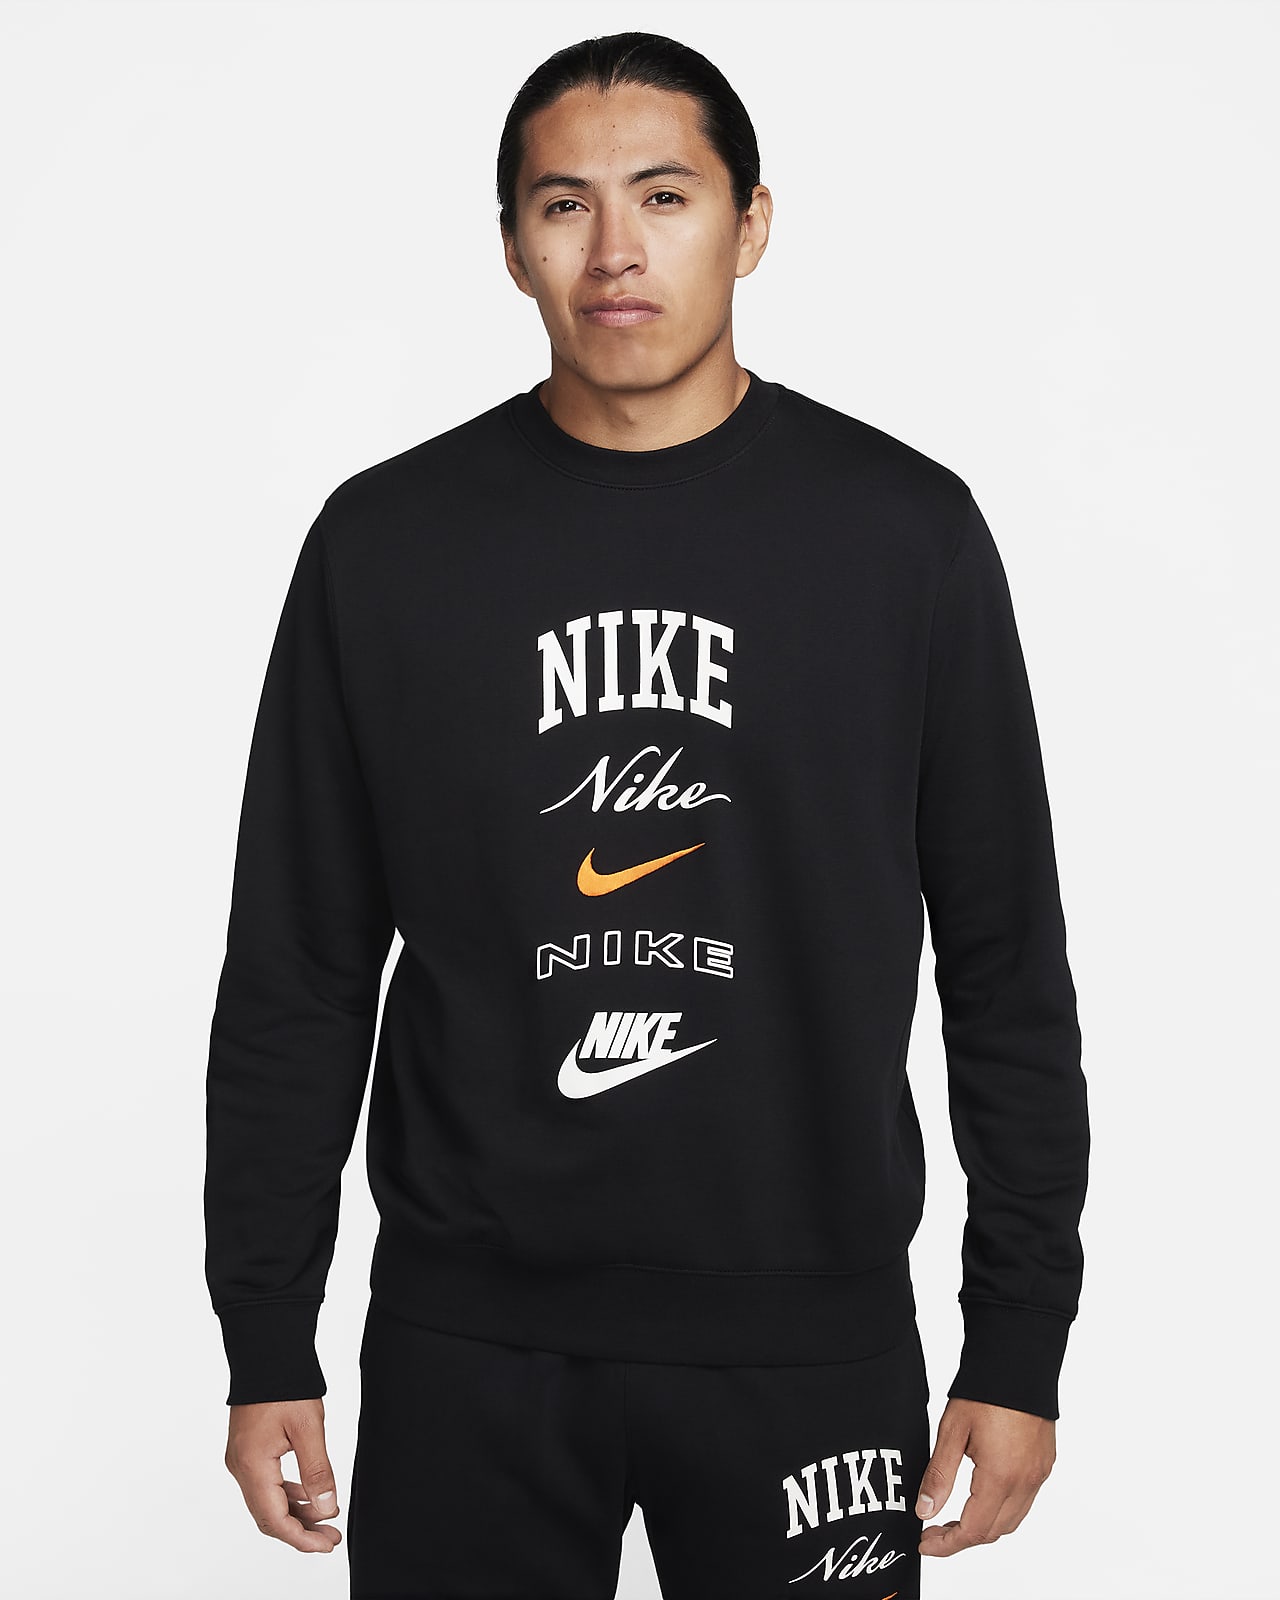 Nike Little Boys 2T-7 Long-Sleeve All-Over Club Pull-Over Hoodie